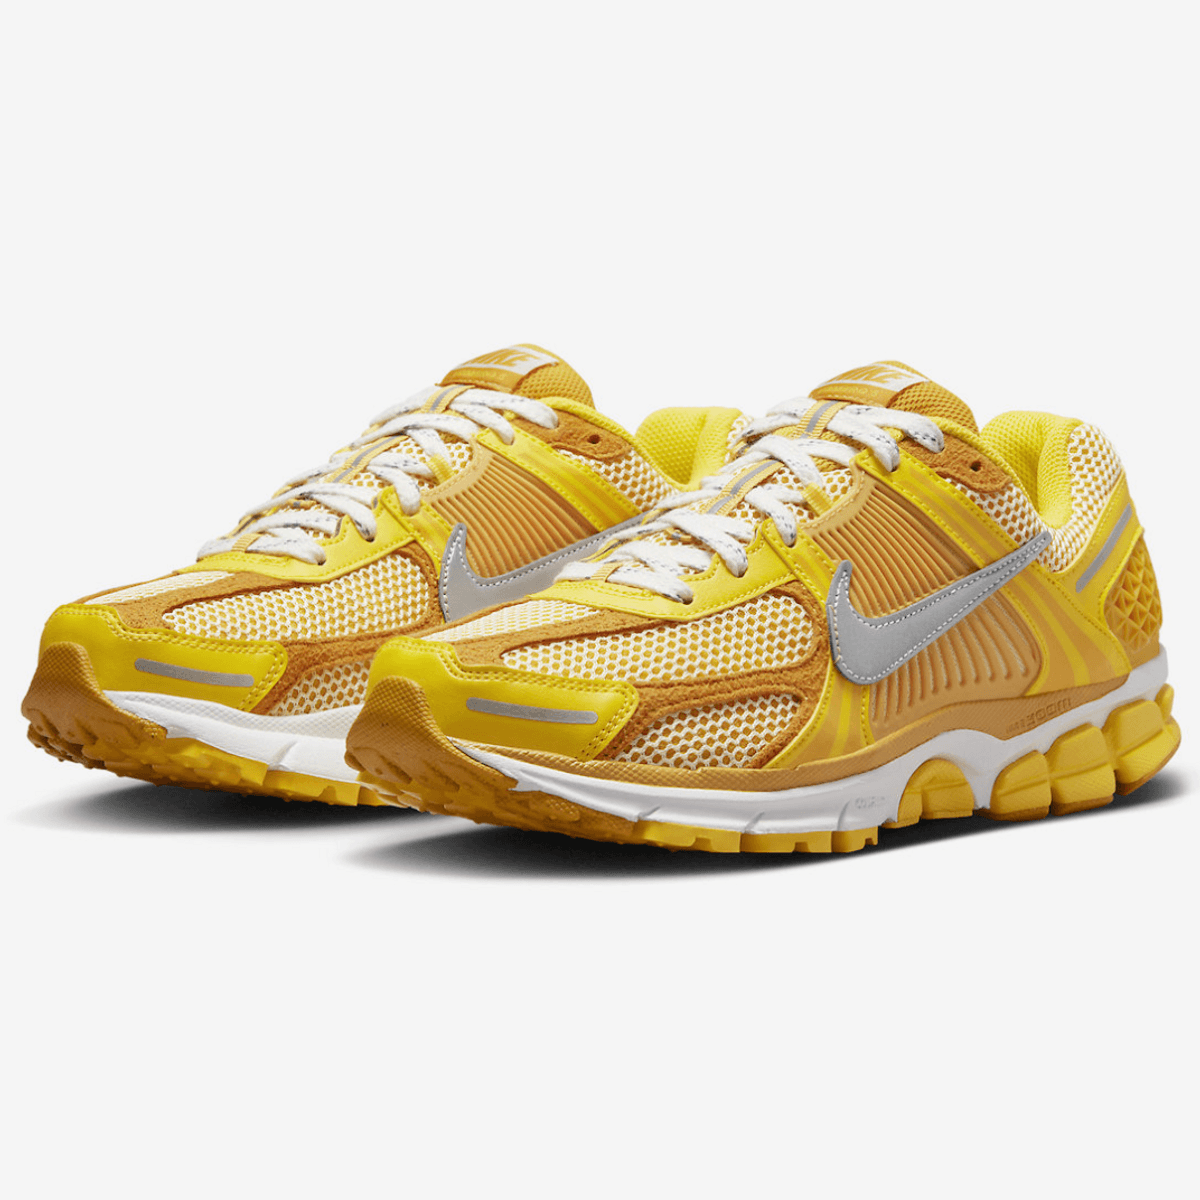 The Nike Zoom Vomero 5 Varsity Maize Will Bloom Spring 2023